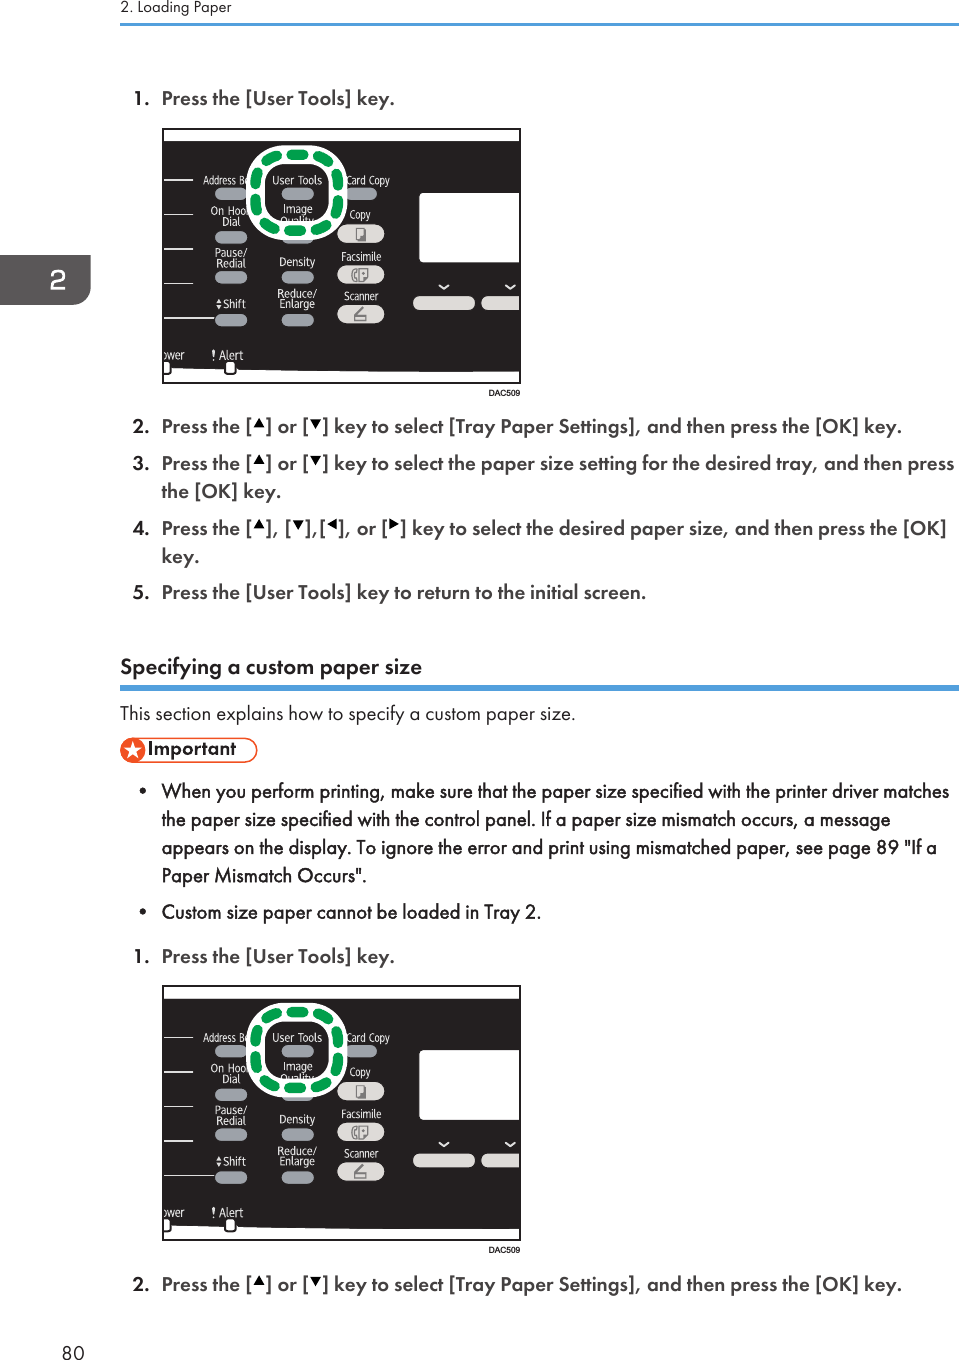 1. Press the [User Tools] key.DAC5092. Press the [ ] or [ ] key to select [Tray Paper Settings], and then press the [OK] key.3. Press the [ ] or [ ] key to select the paper size setting for the desired tray, and then pressthe [OK] key.4. Press the [ ], [ ],[ ], or [ ] key to select the desired paper size, and then press the [OK]key.5. Press the [User Tools] key to return to the initial screen.Specifying a custom paper sizeThis section explains how to specify a custom paper size.• When you perform printing, make sure that the paper size specified with the printer driver matchesthe paper size specified with the control panel. If a paper size mismatch occurs, a messageappears on the display. To ignore the error and print using mismatched paper, see page 89 &quot;If aPaper Mismatch Occurs&quot;.• Custom size paper cannot be loaded in Tray 2.1. Press the [User Tools] key.DAC5092. Press the [ ] or [ ] key to select [Tray Paper Settings], and then press the [OK] key.2. Loading Paper80